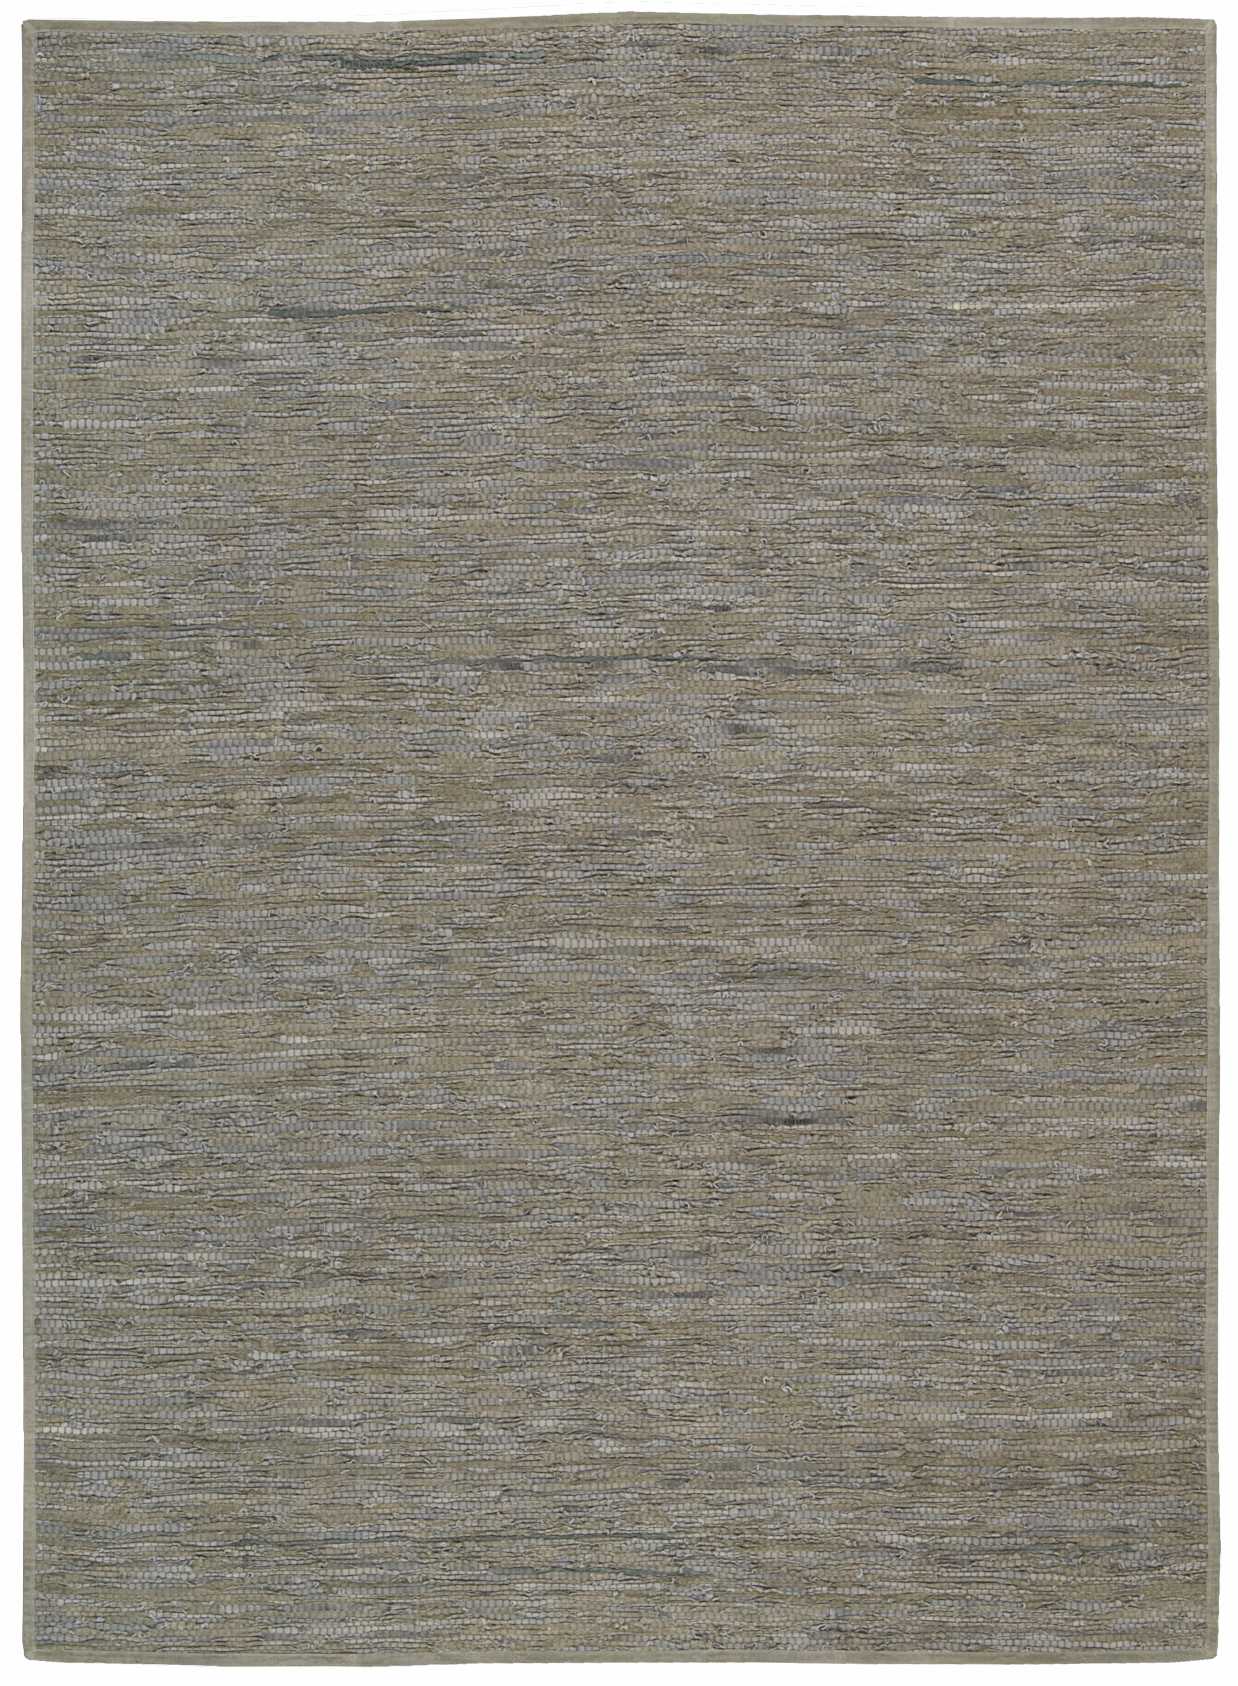 Joseph Abboud Stone Laundered Stone Area Rug by Nourison